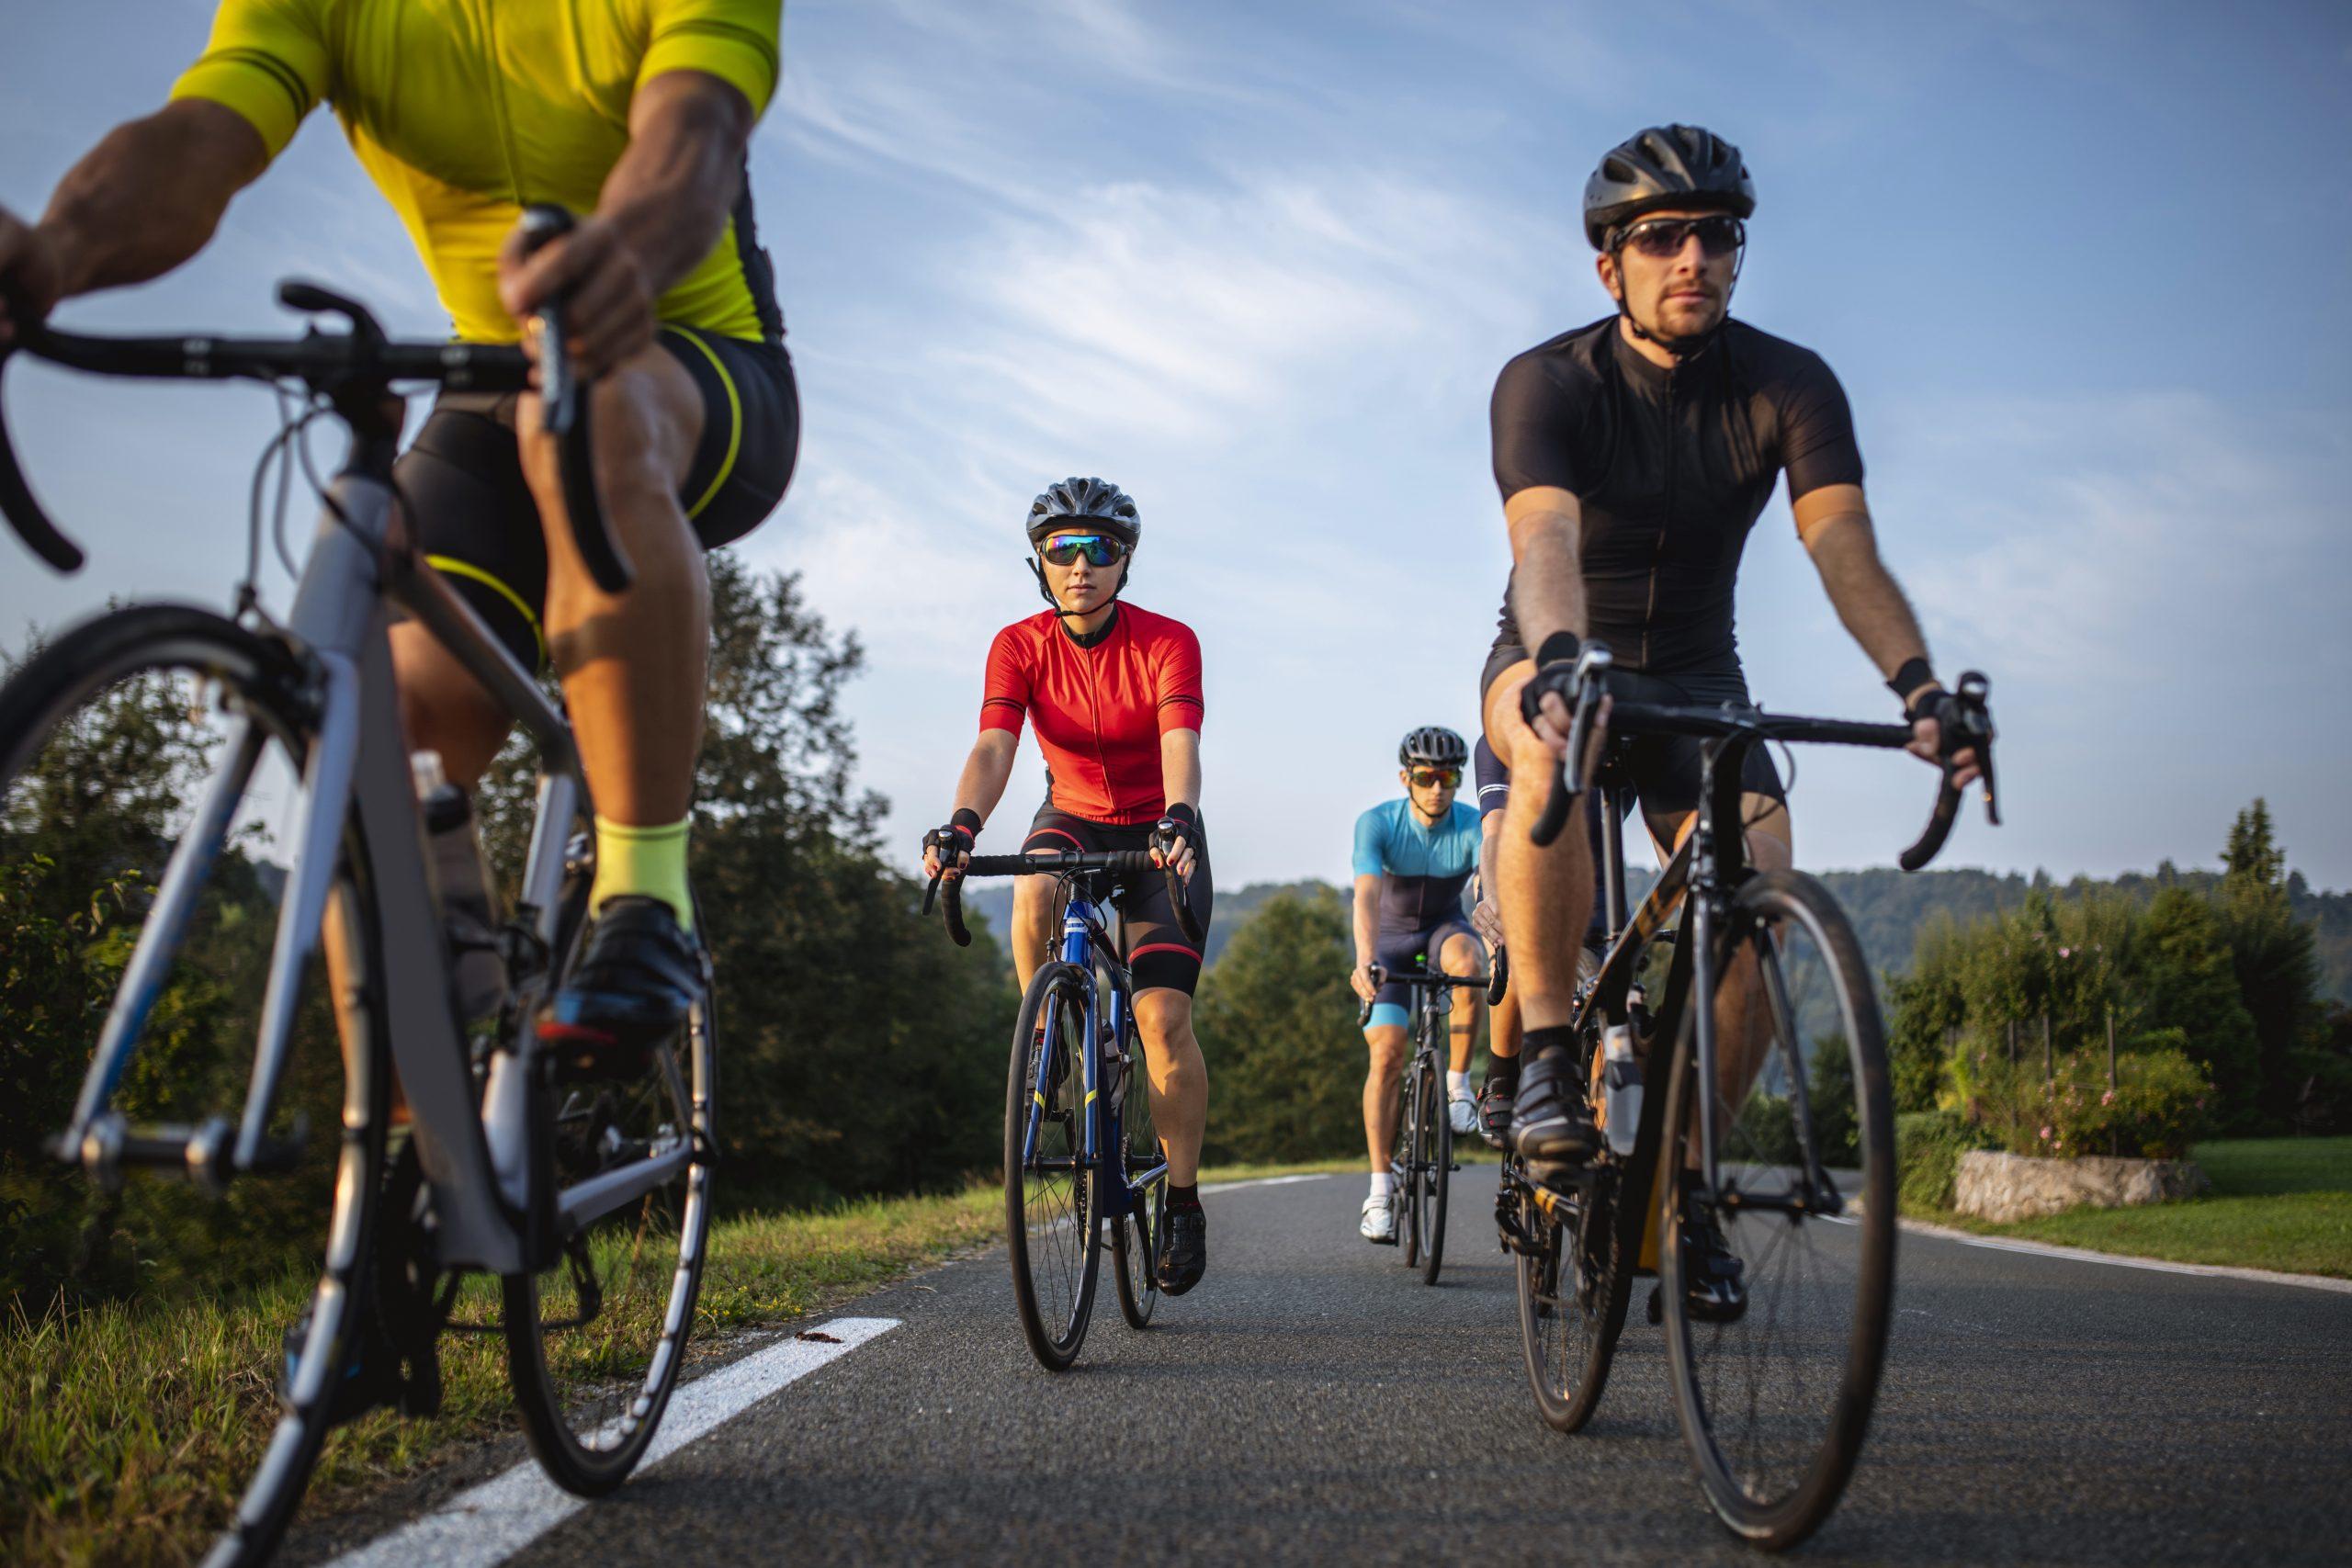 Group of Fit Cyclists Riding Mountain Road in Morning